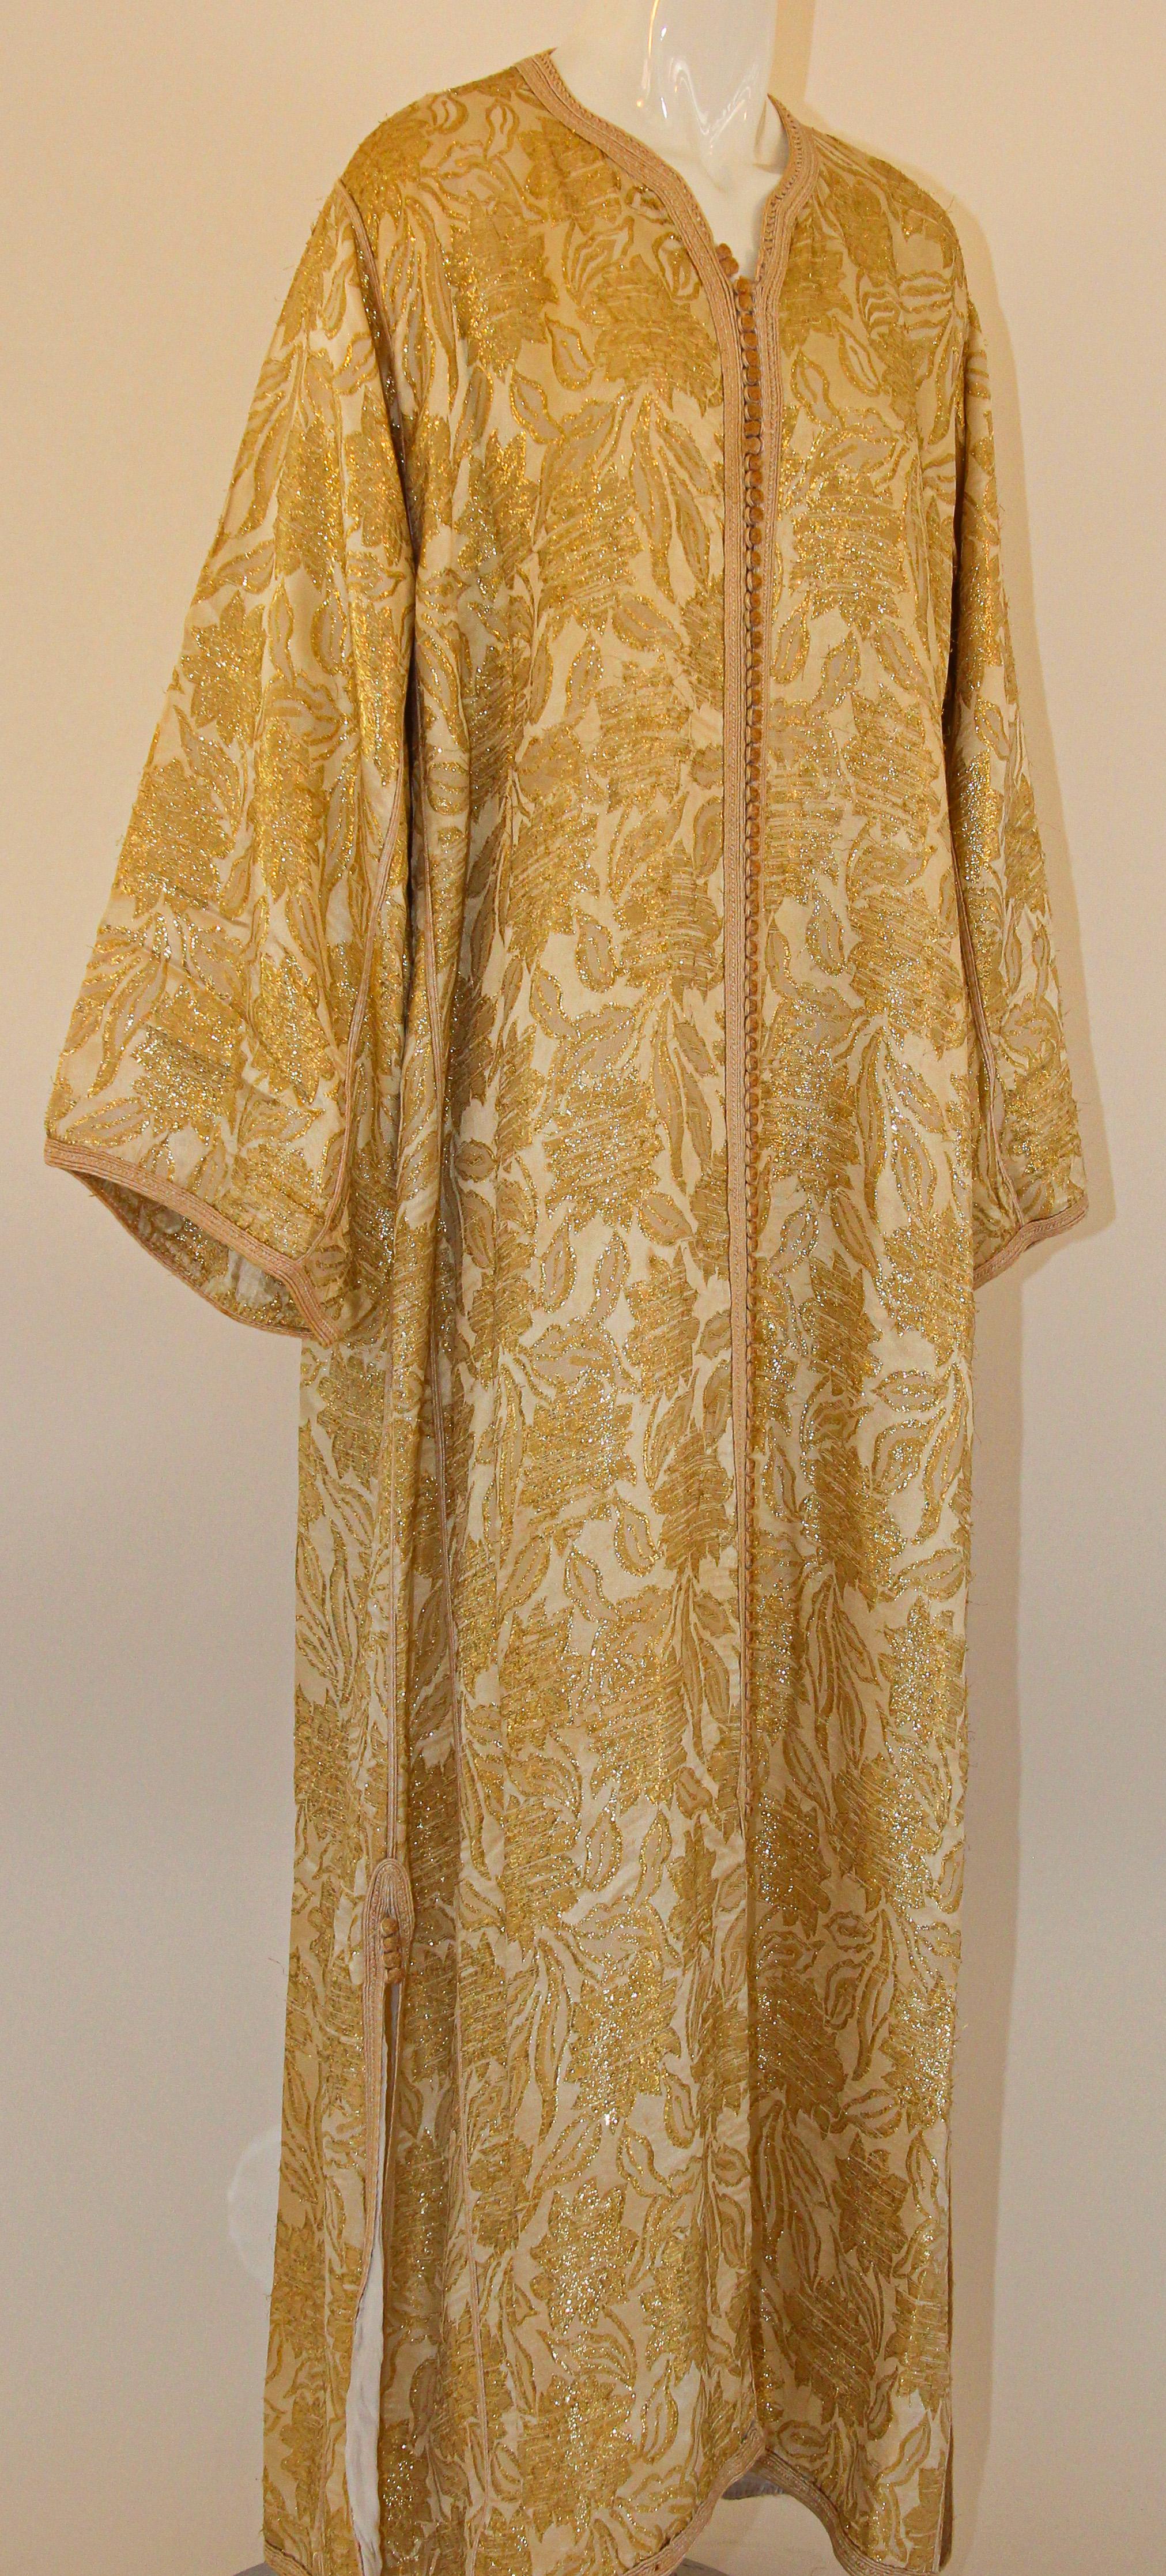 1940s Moroccan Antique Caftan Gold Damask Embroidered Caftan Maxi Dress In Good Condition For Sale In North Hollywood, CA